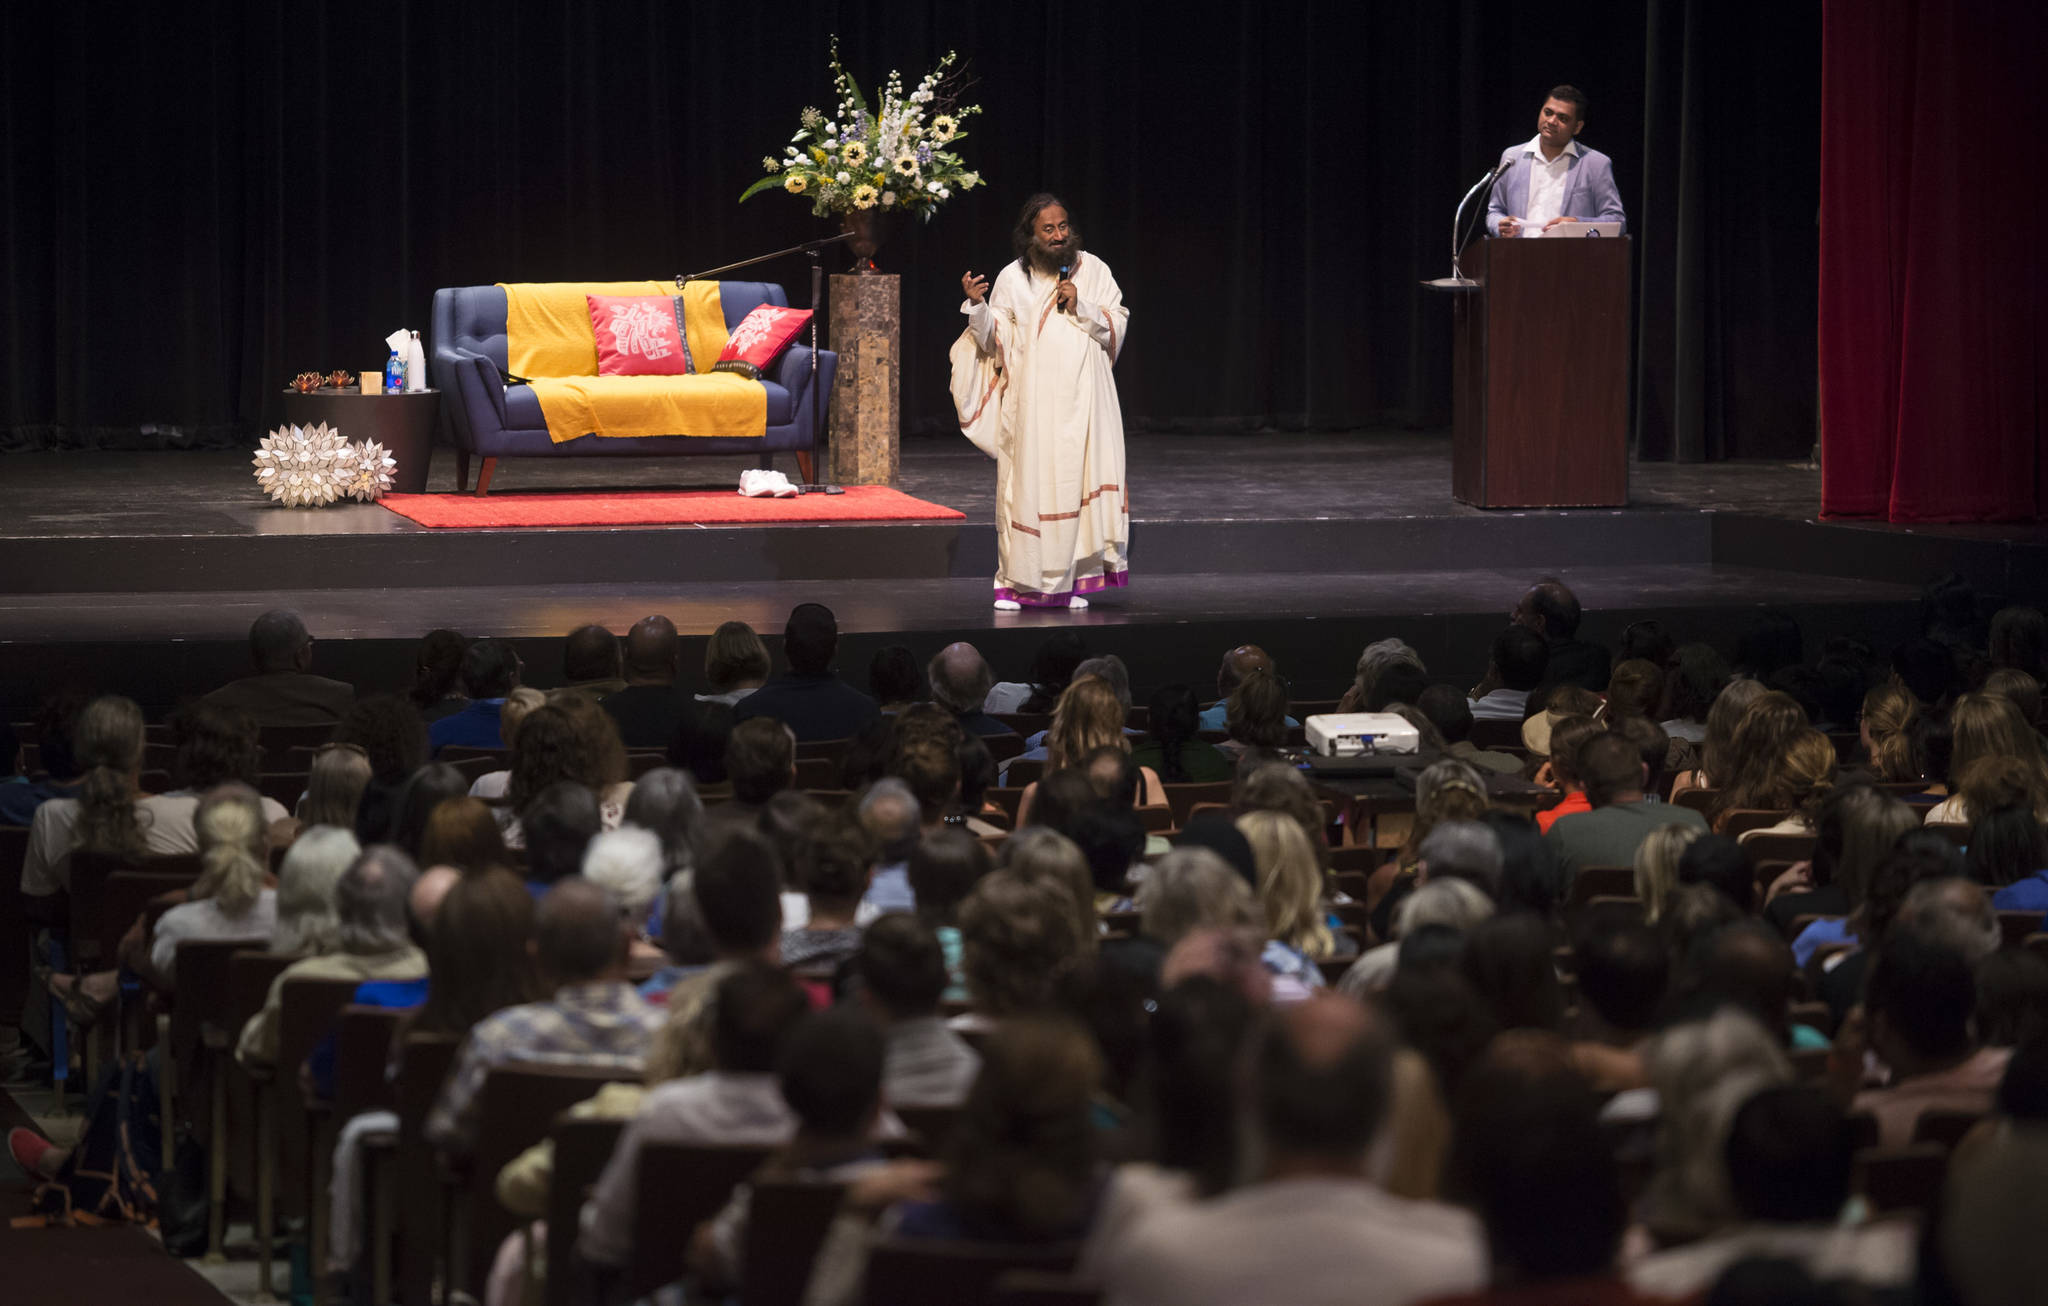 Spiritual leader Sri Sri Ravi Shankar of The Art of Living Foundation leads a group meditation at the Juneau-Douglas High School auditorium on Tuesday, July 31, 2018, as part of his West Coast Tour that also includes San Francisco and Seattle. (Michael Penn | Juneau Empire)